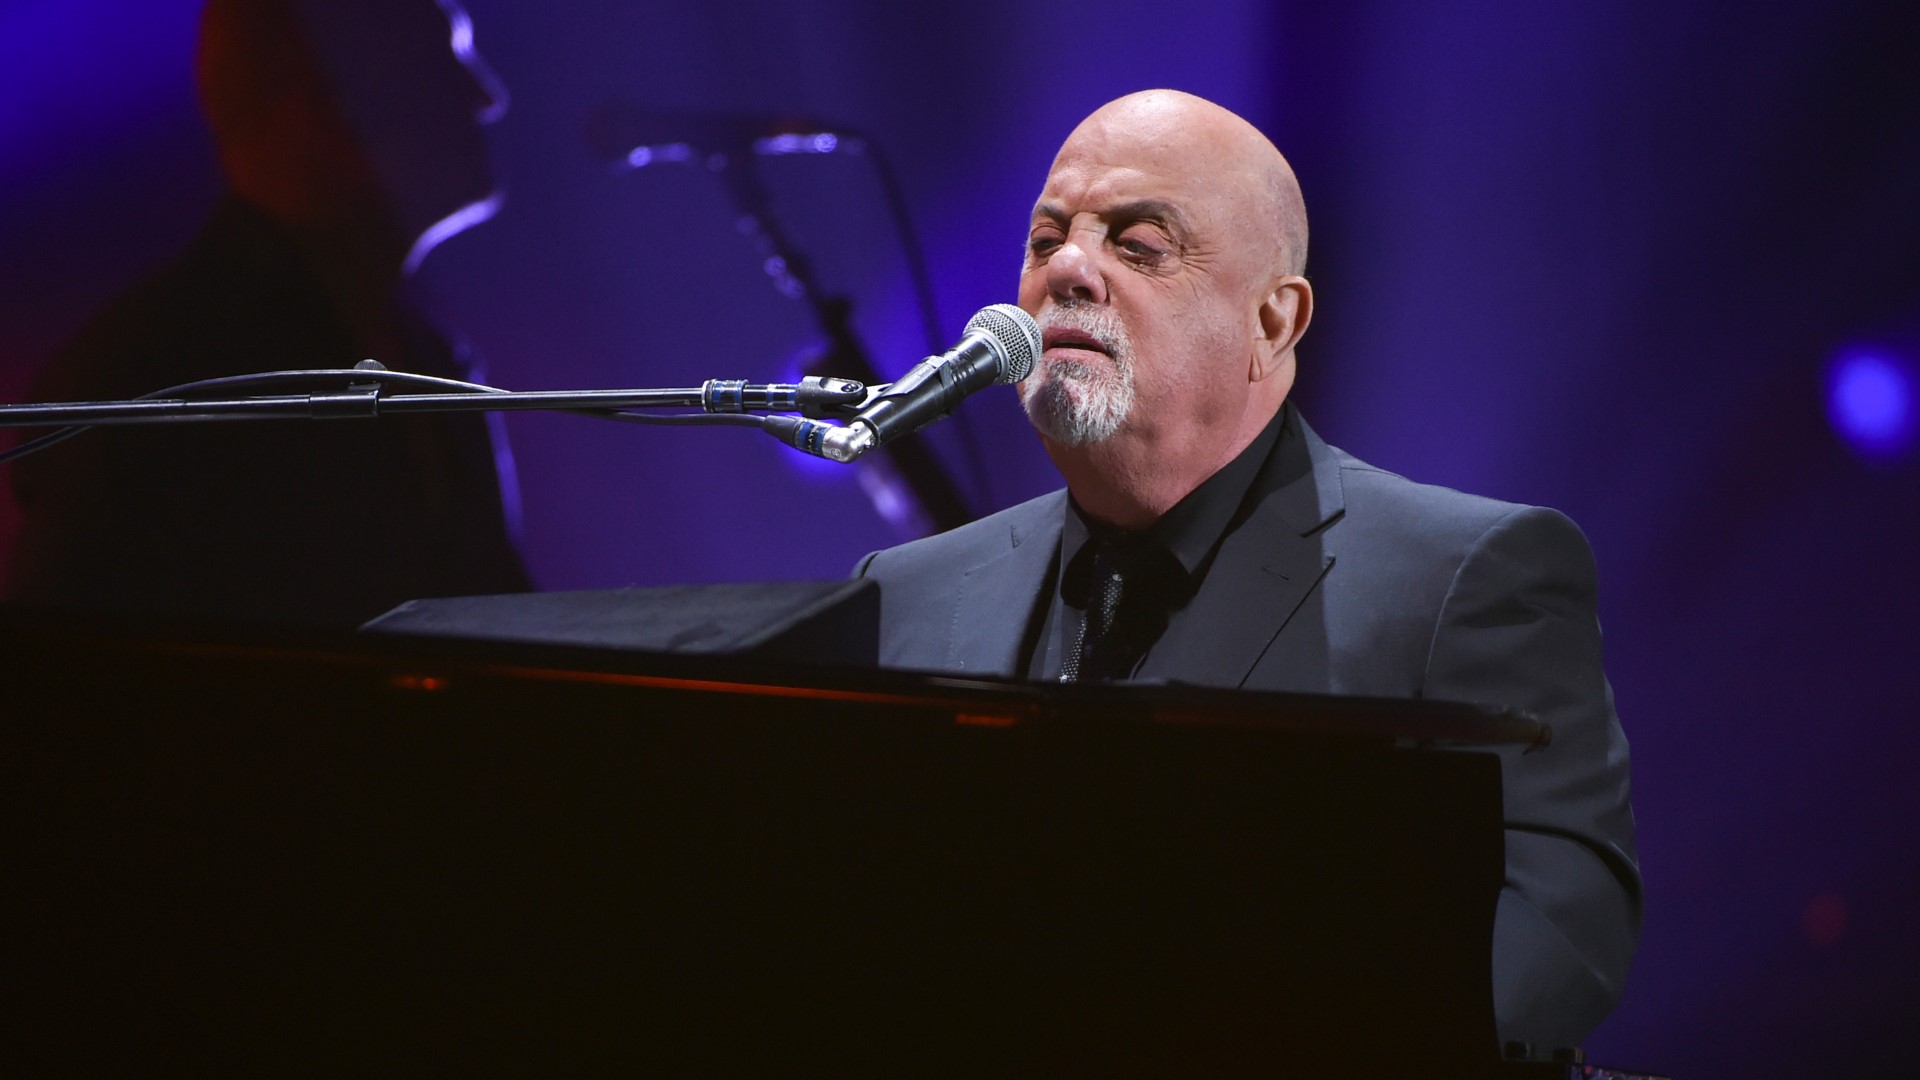 The Billy Joel concert scheduled at Bank of America Stadium in uptown Charlotte has been rescheduled until April 23, 2022.